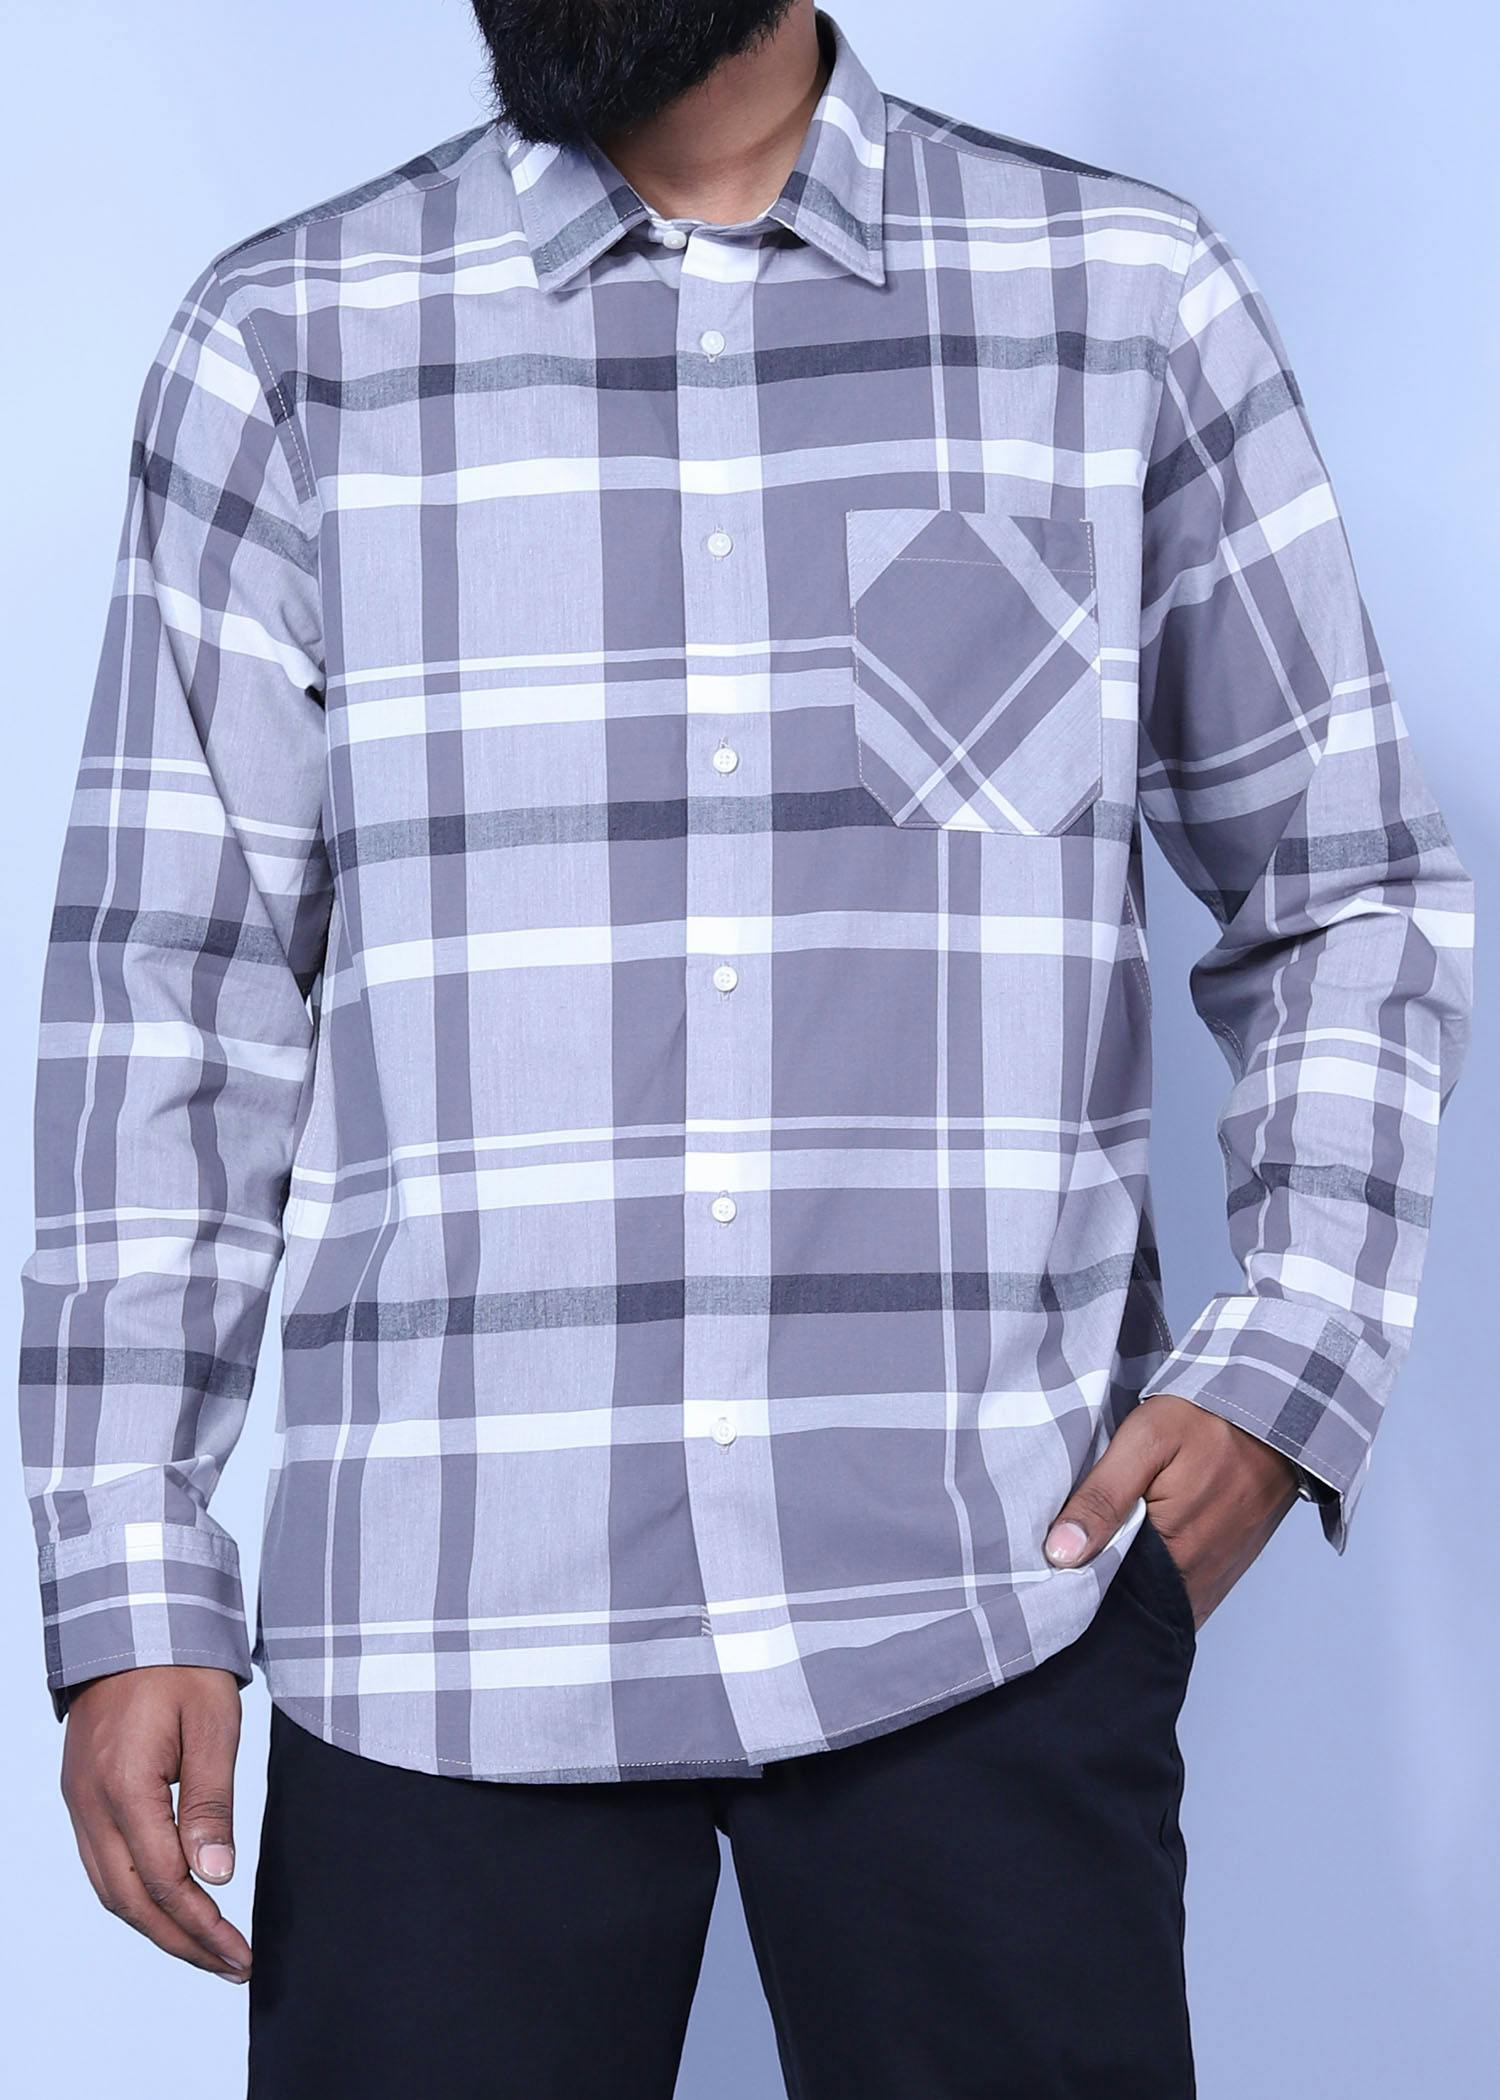 istanbul xxii fs shirt casterock color facecropped